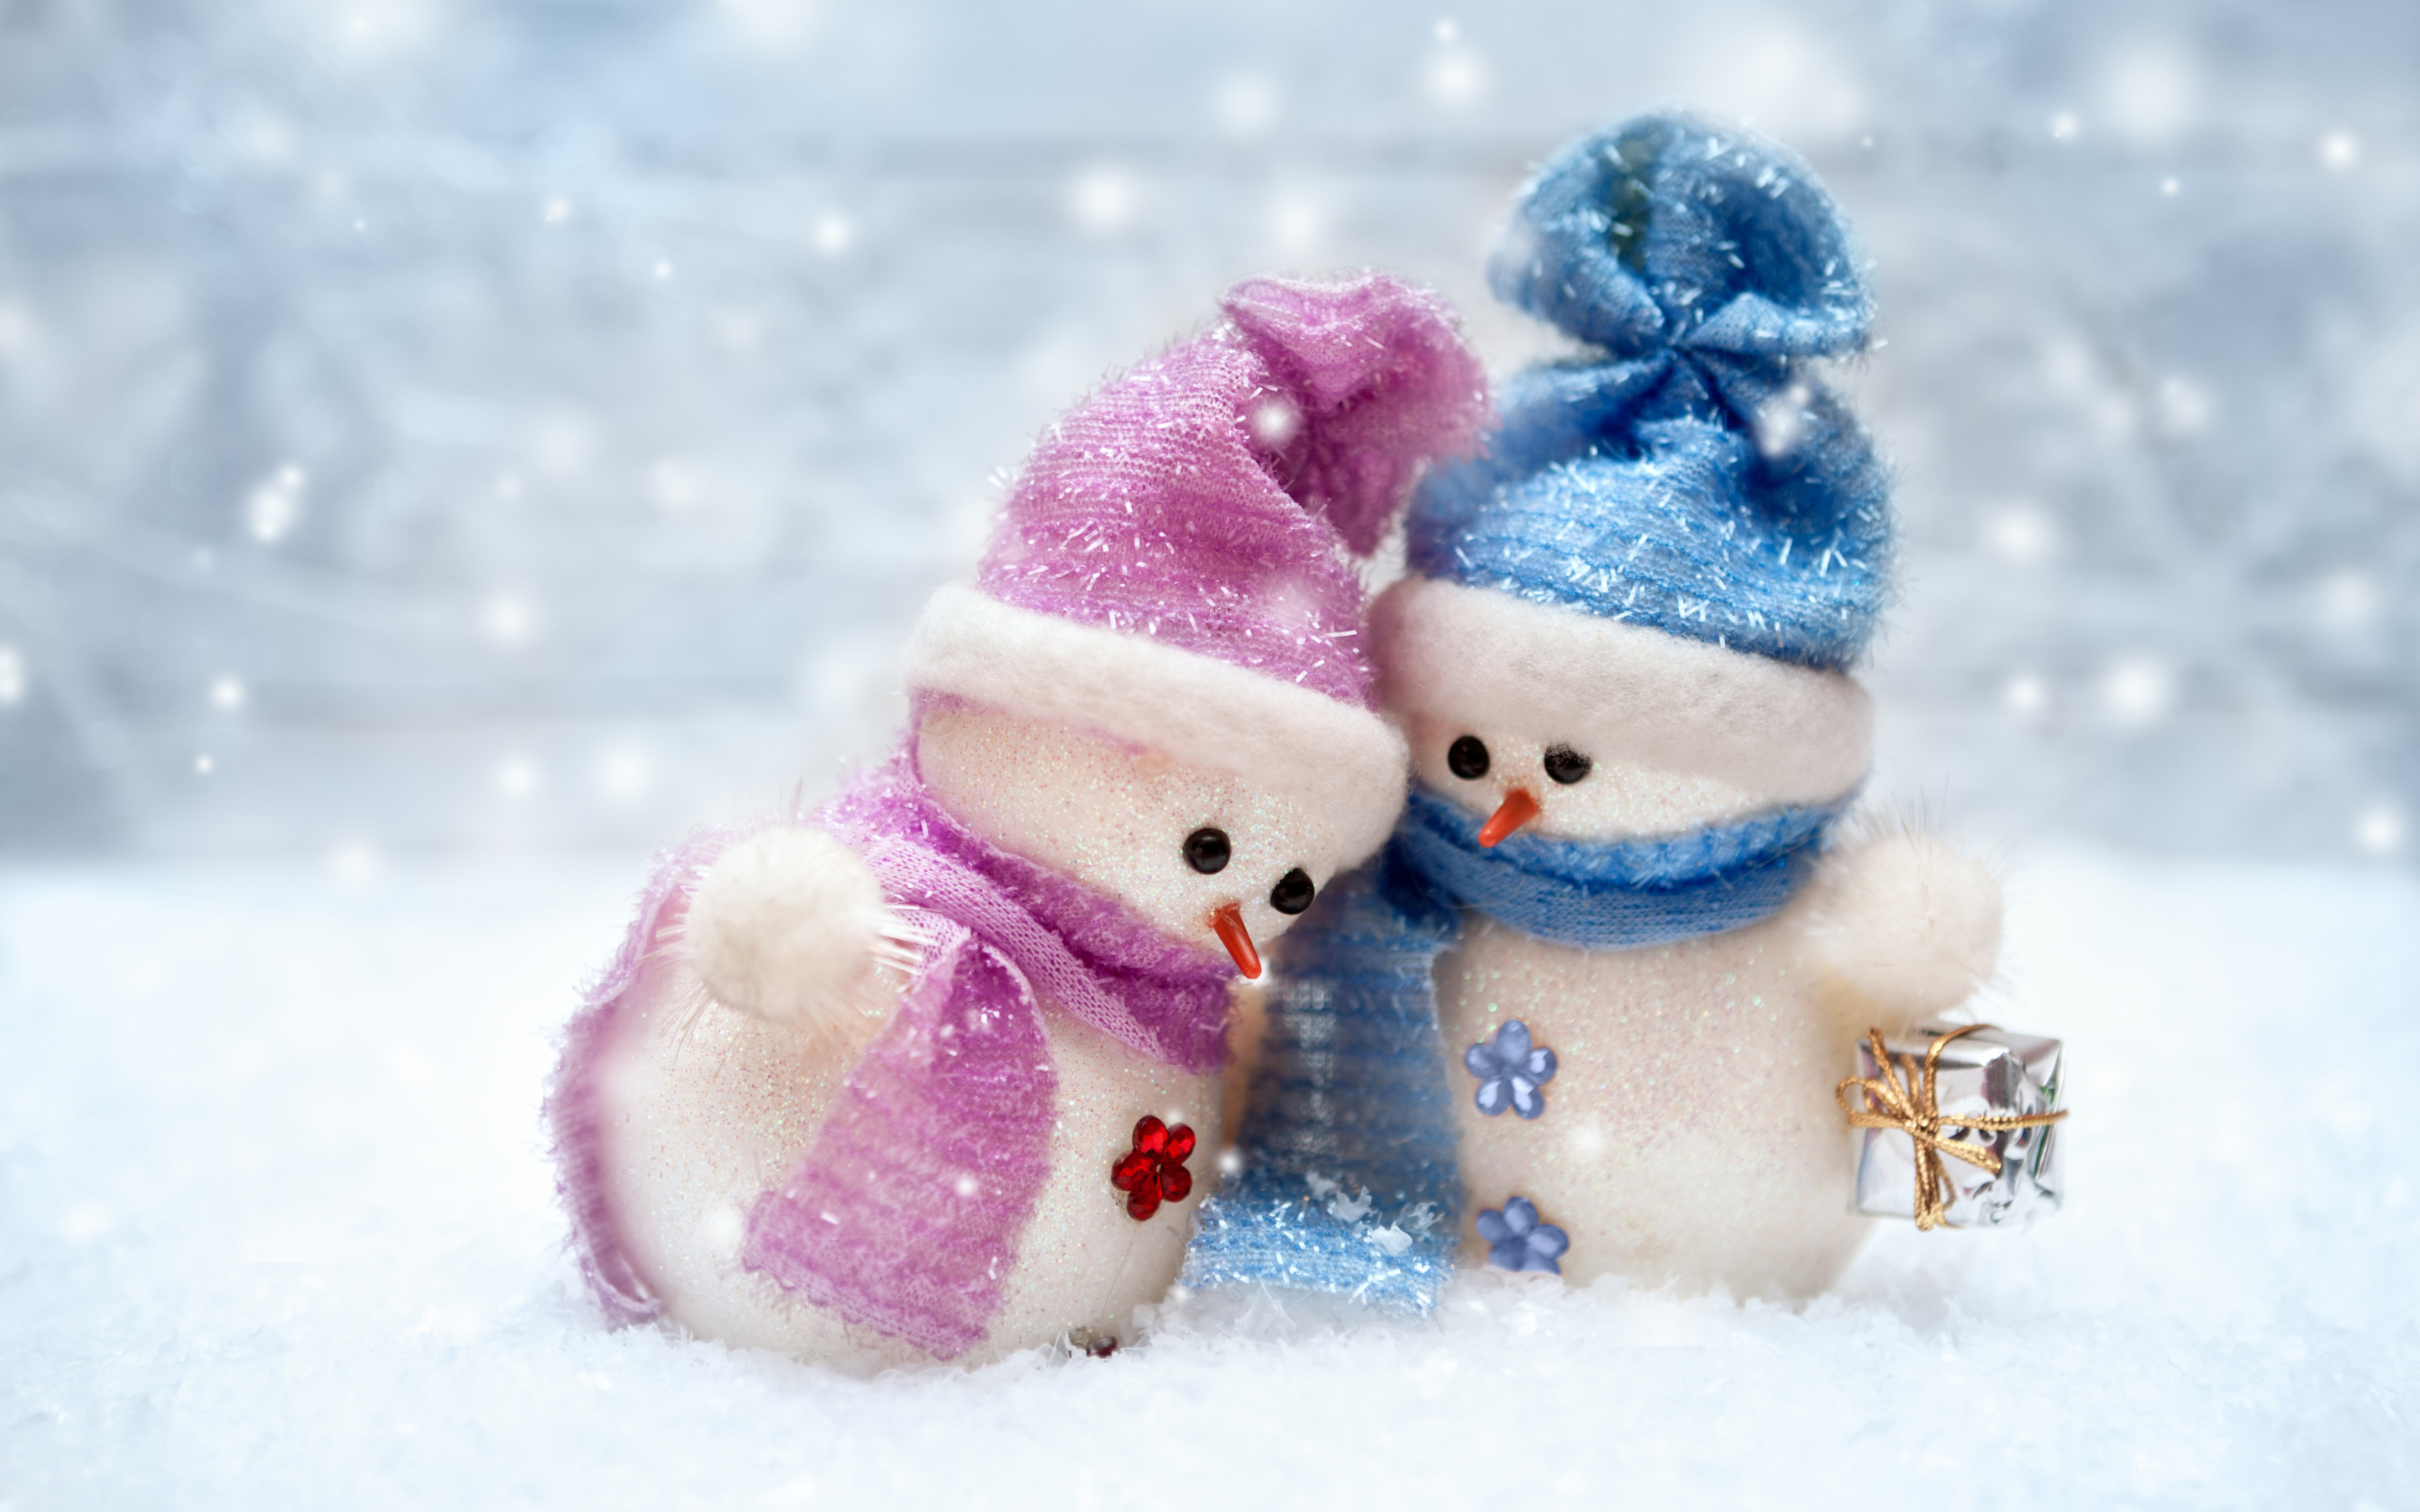 Download wallpaper Snowmen, winter, snow, cute snowmen, couple of snowmen, Merry Christmas, Happy New Year, winter concepts, snowman, Christmas for desktop with resolution 2880x1800. High Quality HD picture wallpaper